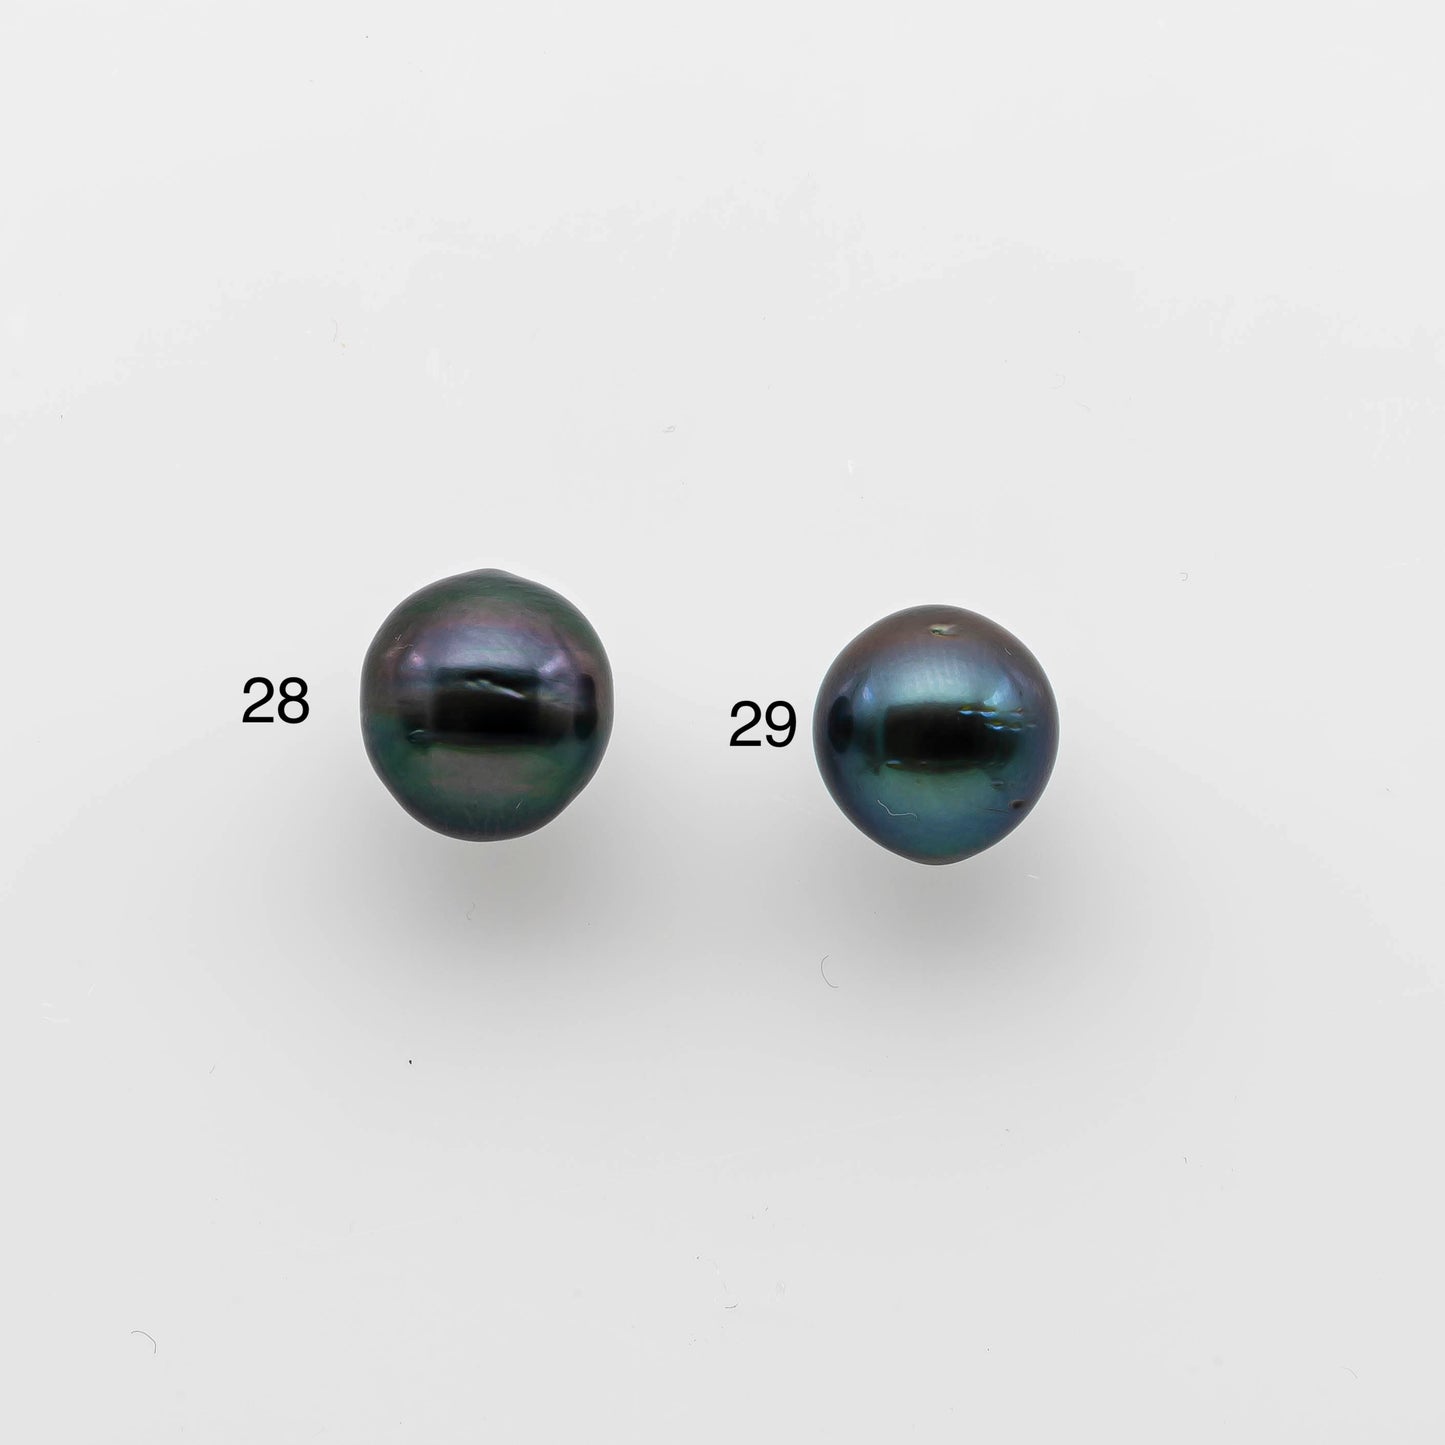 9-10mm Undrilled Tahitian Pearl Tear Drops in Natural Color and High Luster with Minor Blemish, One Single Piece Black Pearl, SKU # 1479TH